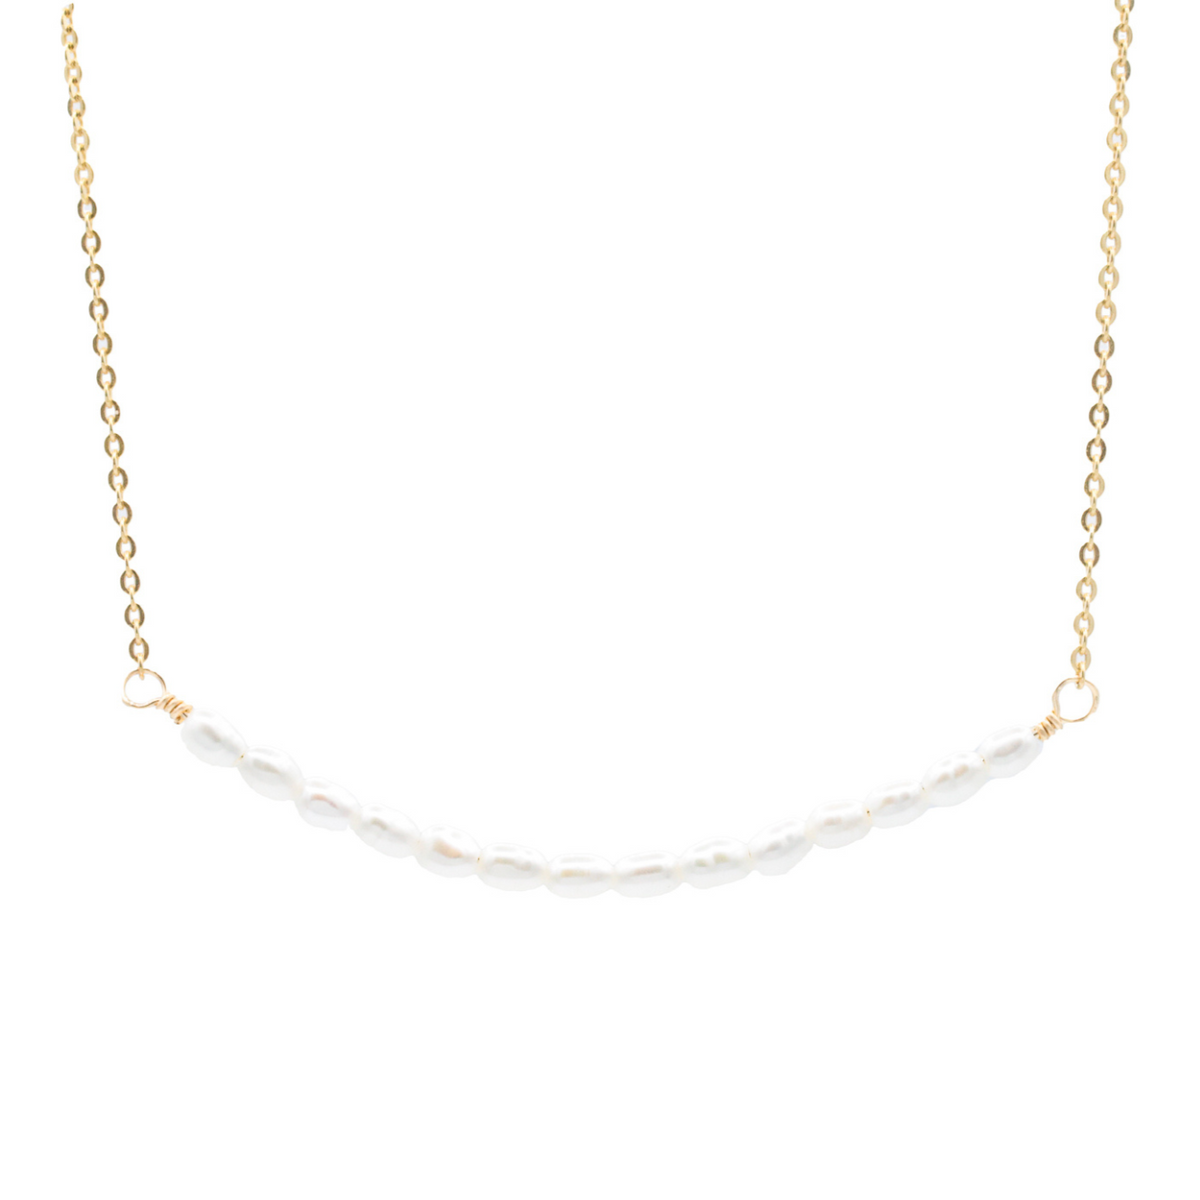 Freshwater pearl bar necklace - 14K gold fill